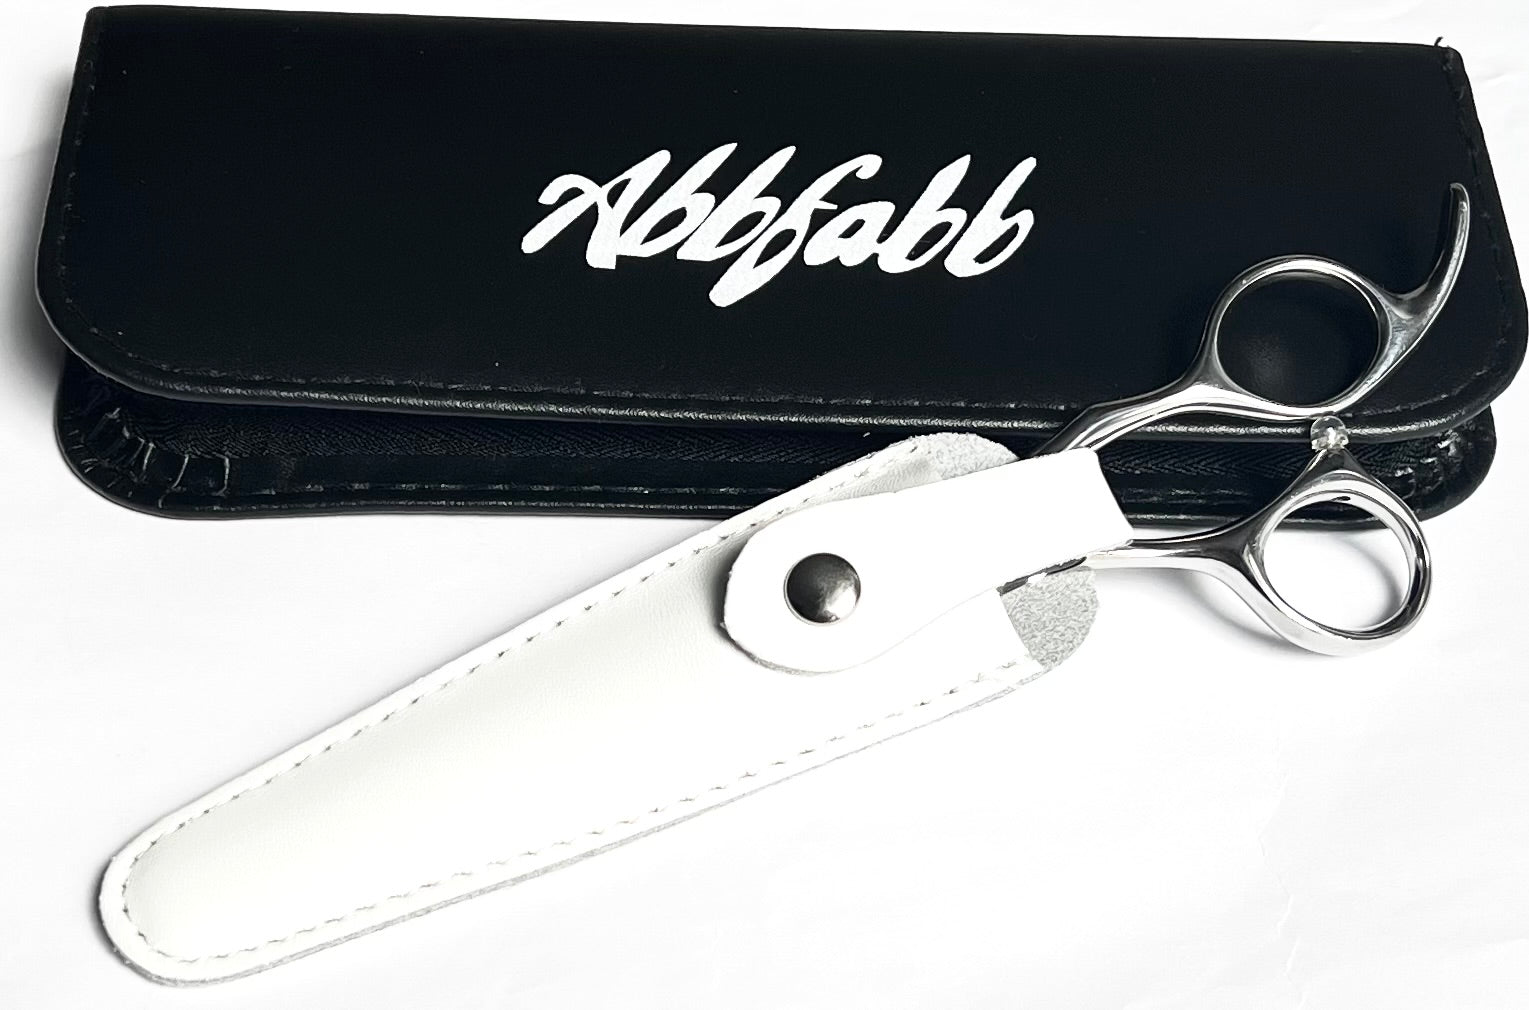 protective cases for dog grooming scissors by Abbfabb